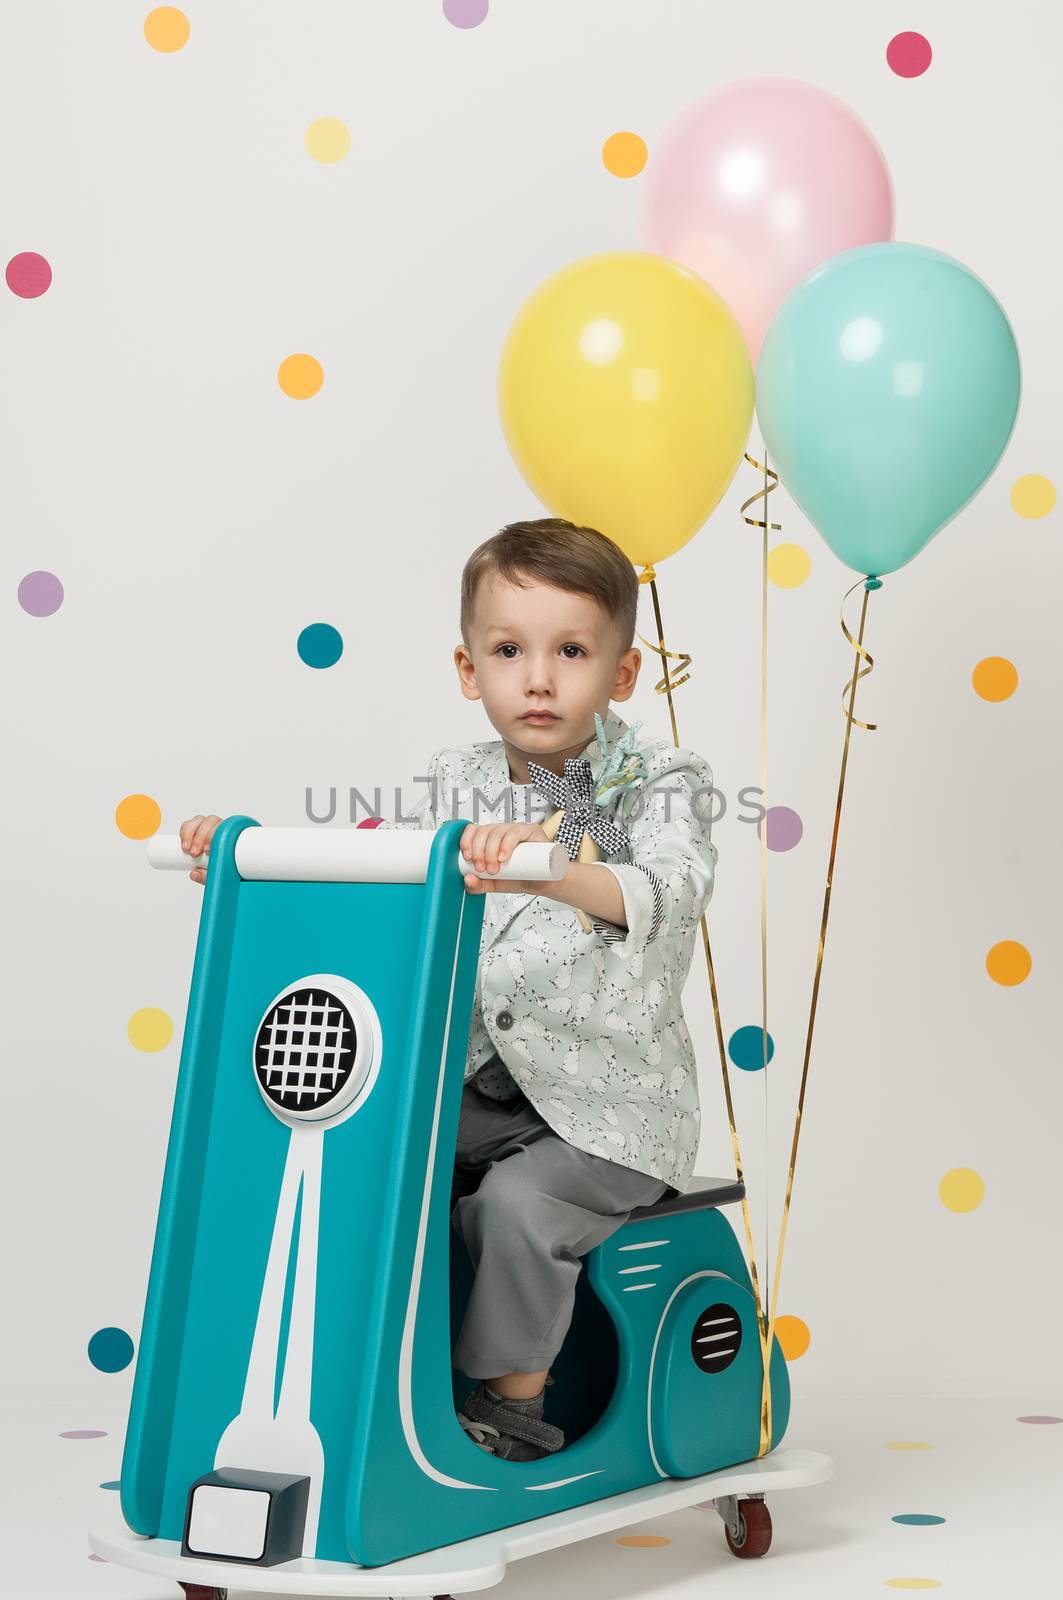 Boy in costume designer on a toy bike with balloons on a white background